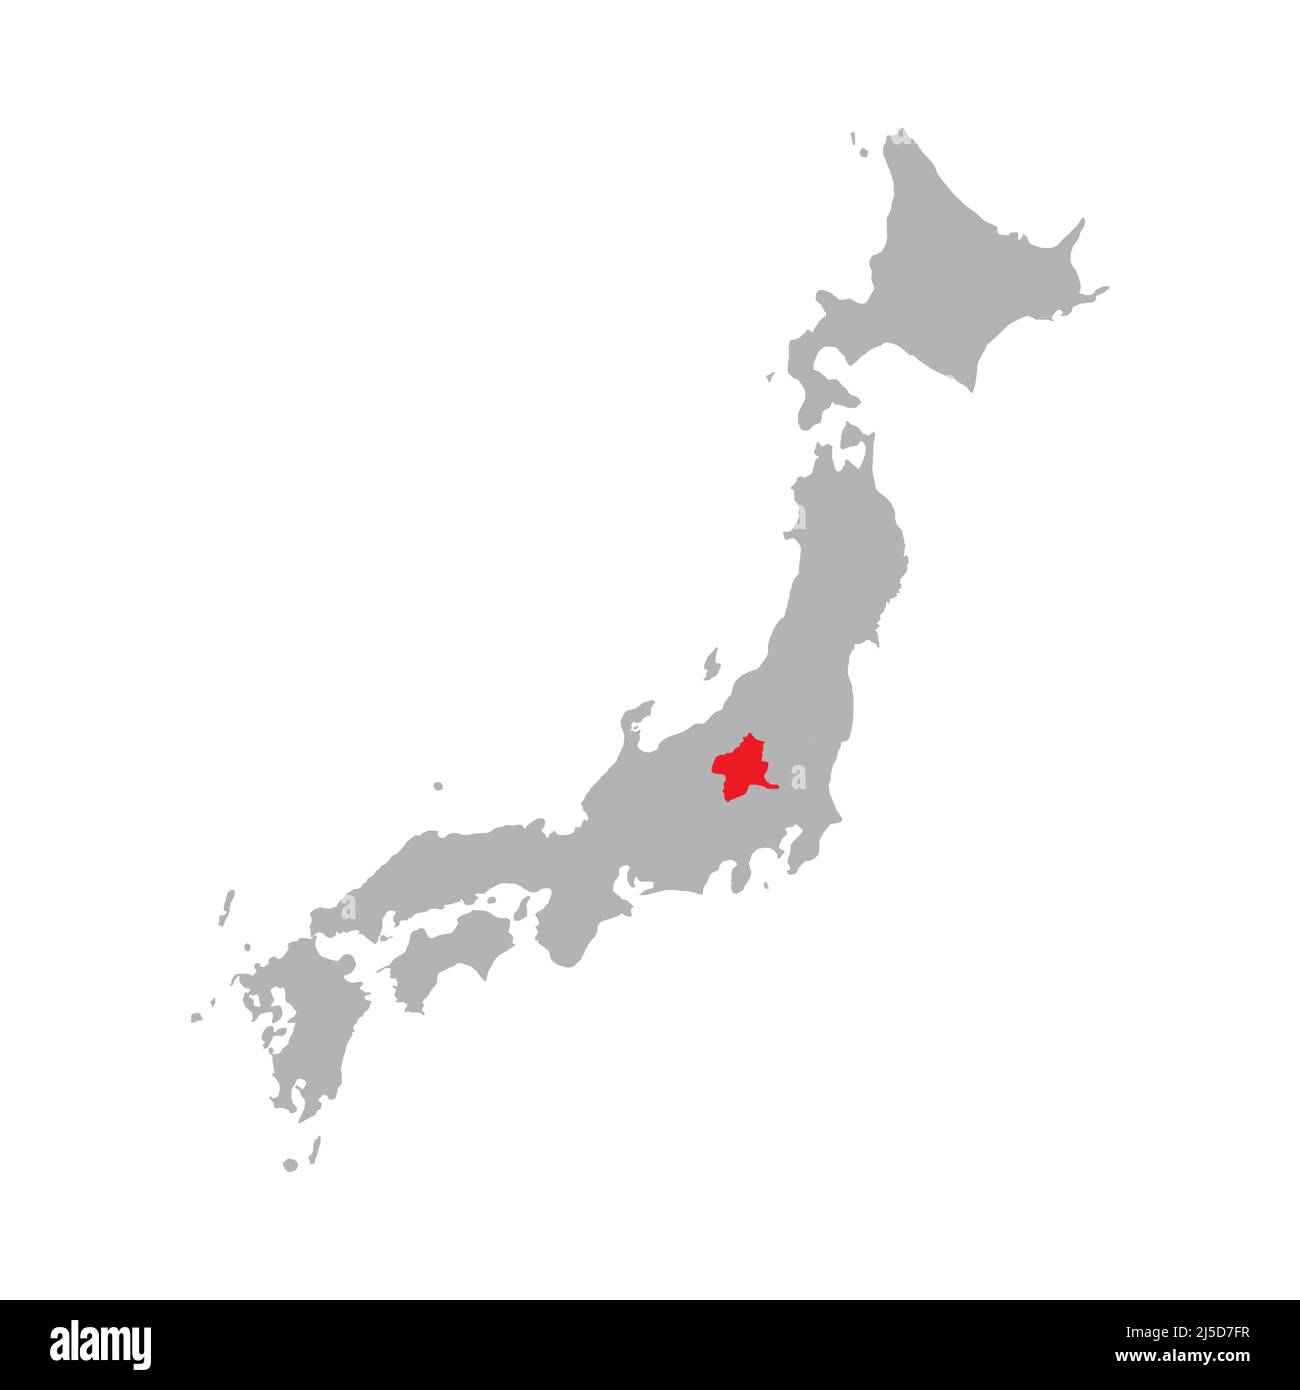 Gunma prefecture highlighted on the map of Japan Stock Vector